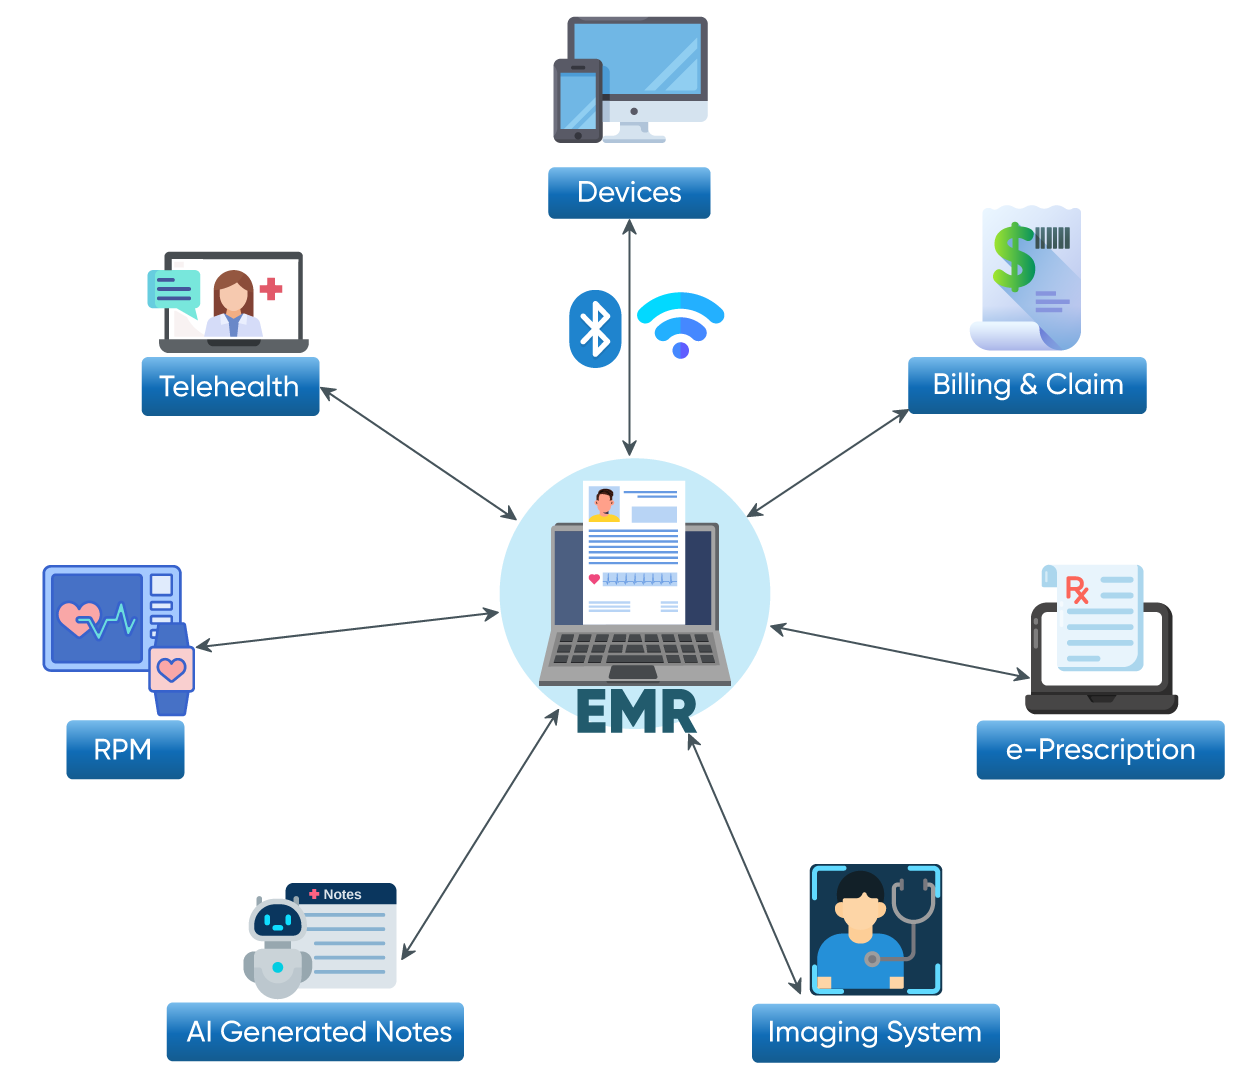 image showing EMR integration with other advanced features and functionalities